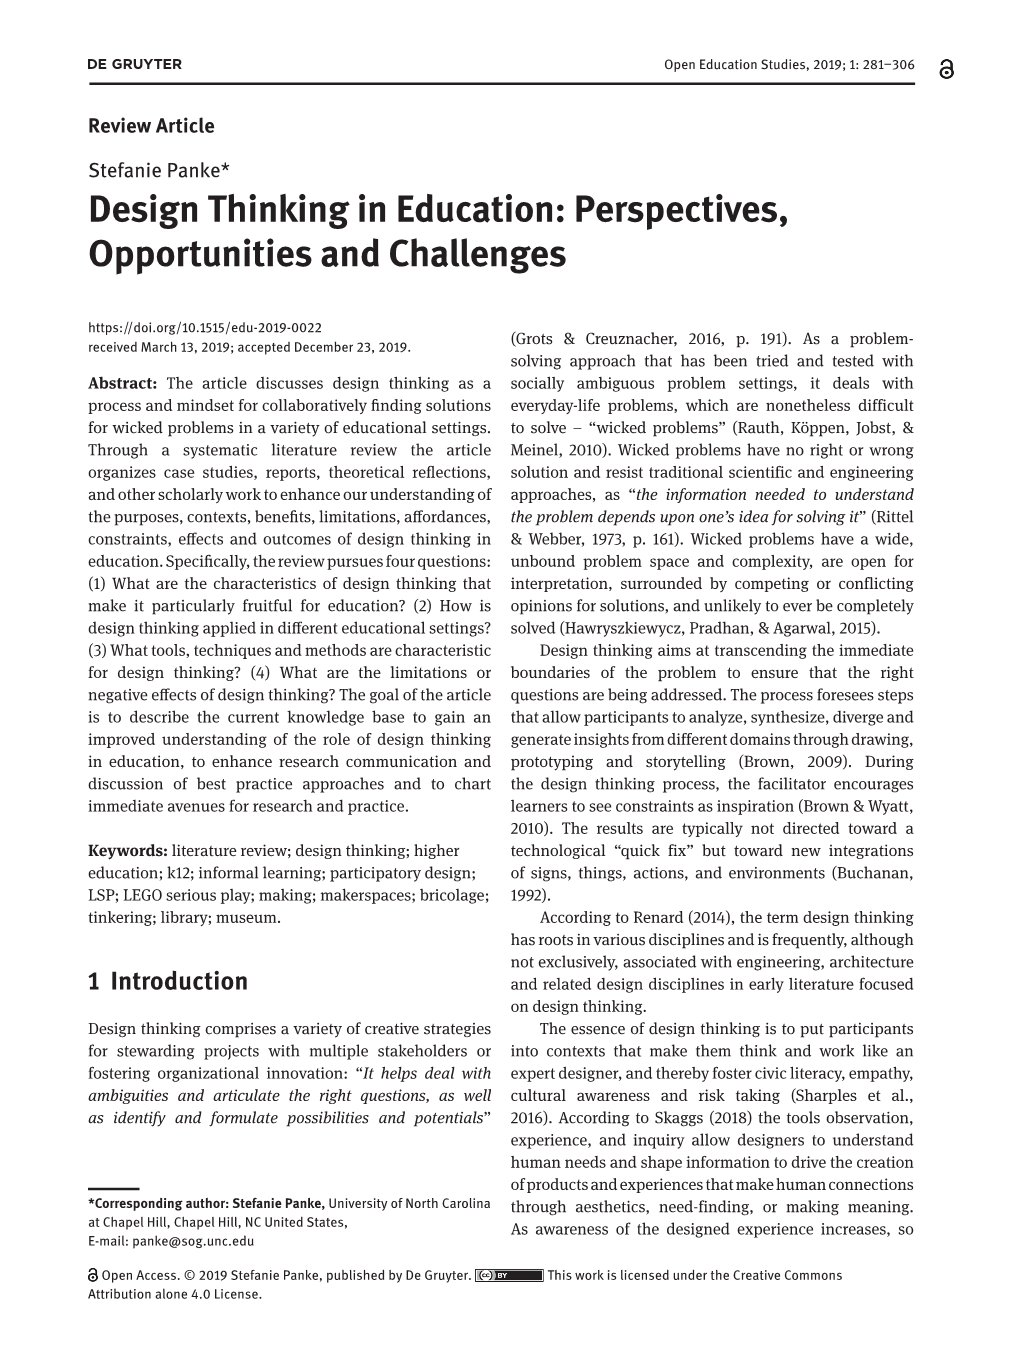 Design Thinking in Education: Perspectives, Opportunities and Challenges